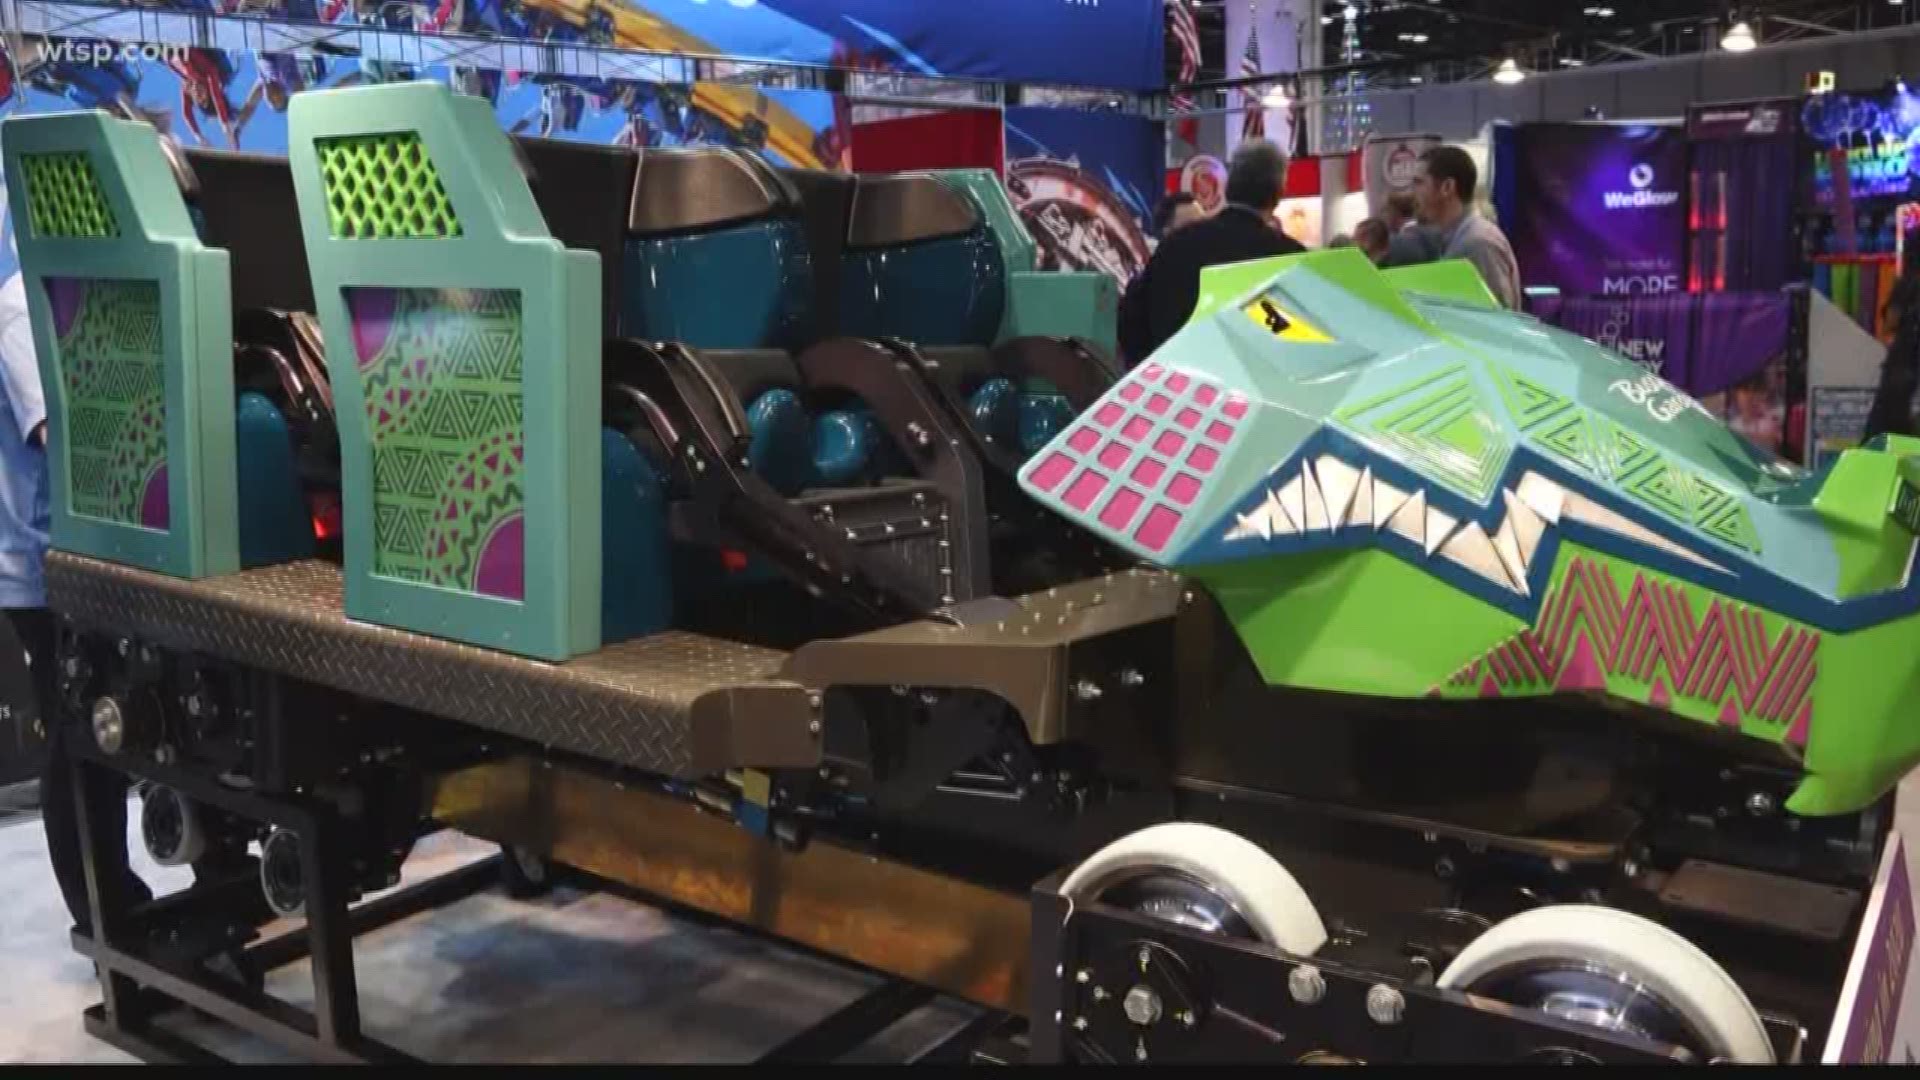 Busch Gardens revealed the ride car for its Iron Gwazi coaster, and Carnival Cruise showed off the ride car for its roller coaster at sea. https://bit.ly/2OFsJK3